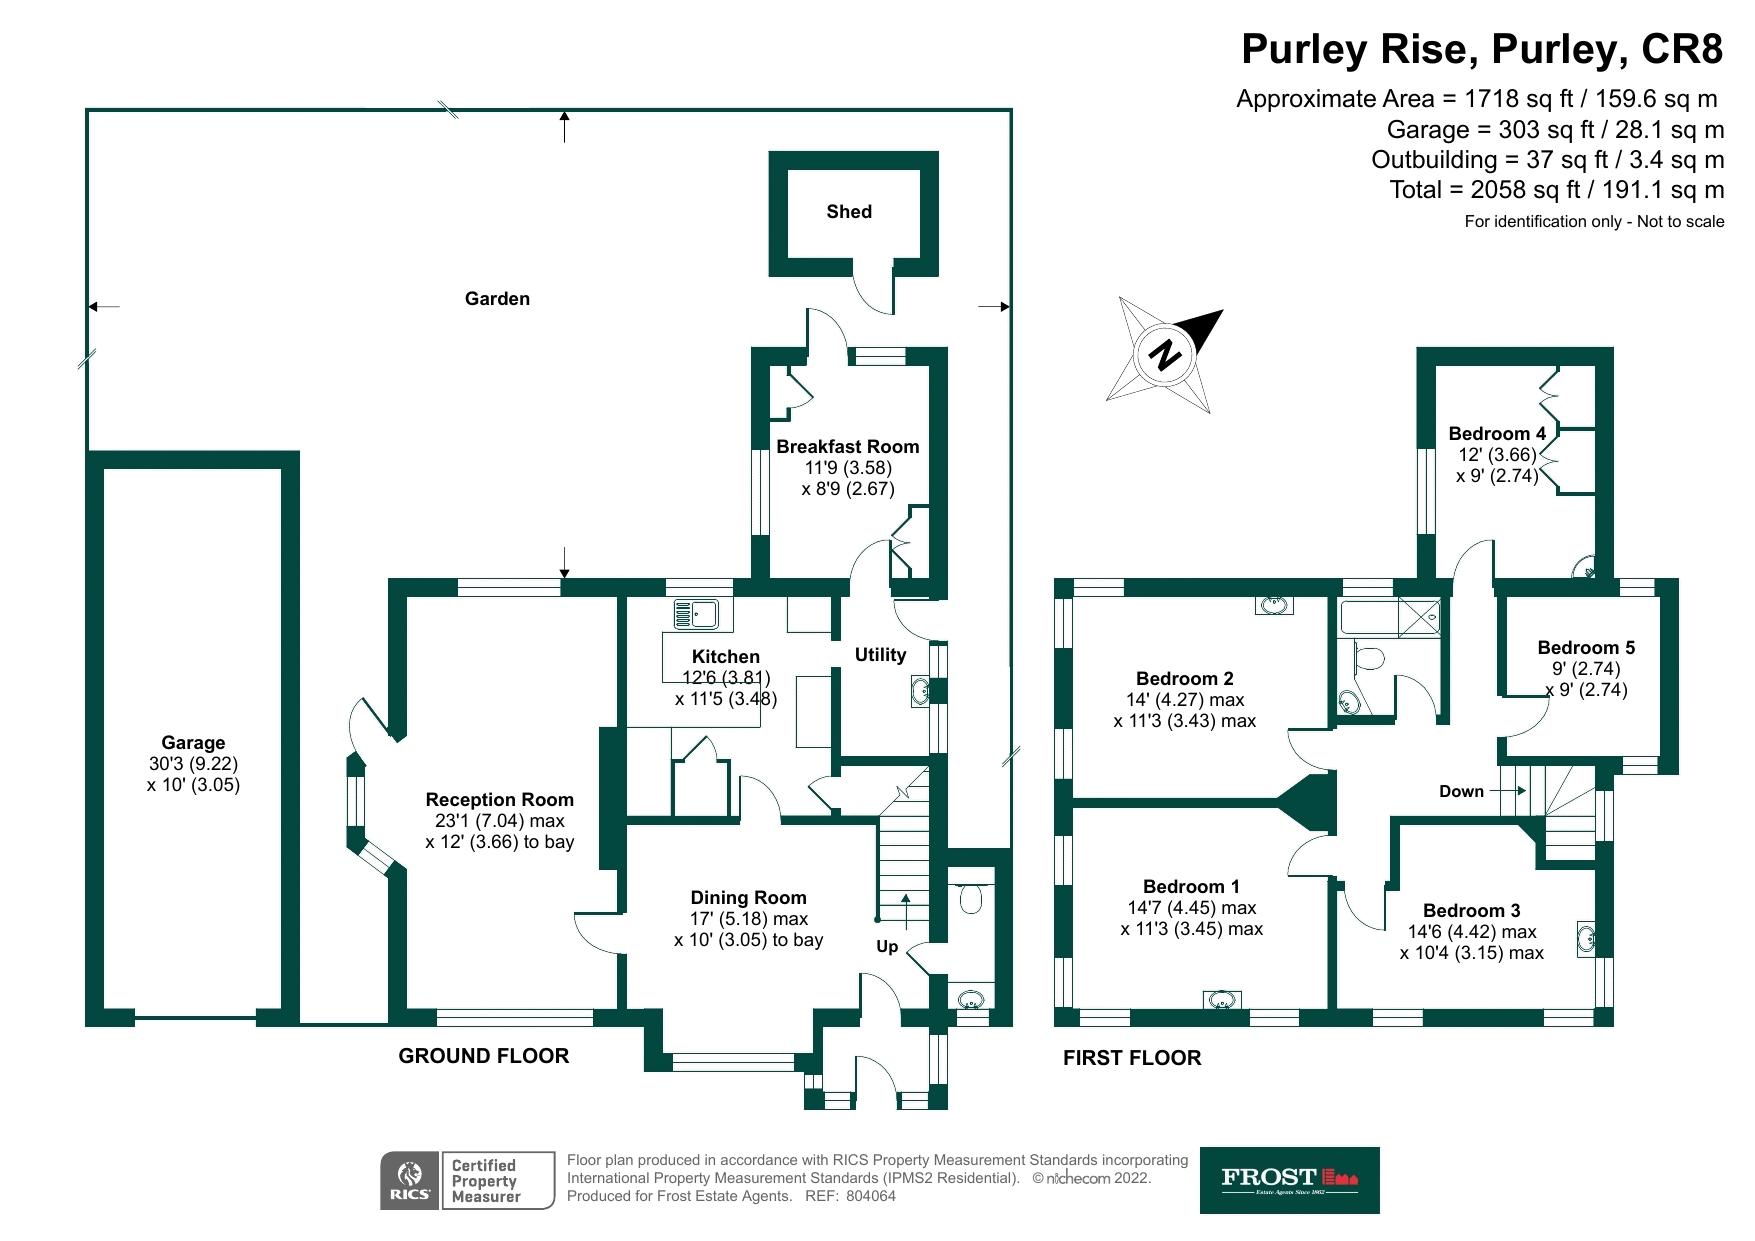 Purley Rise